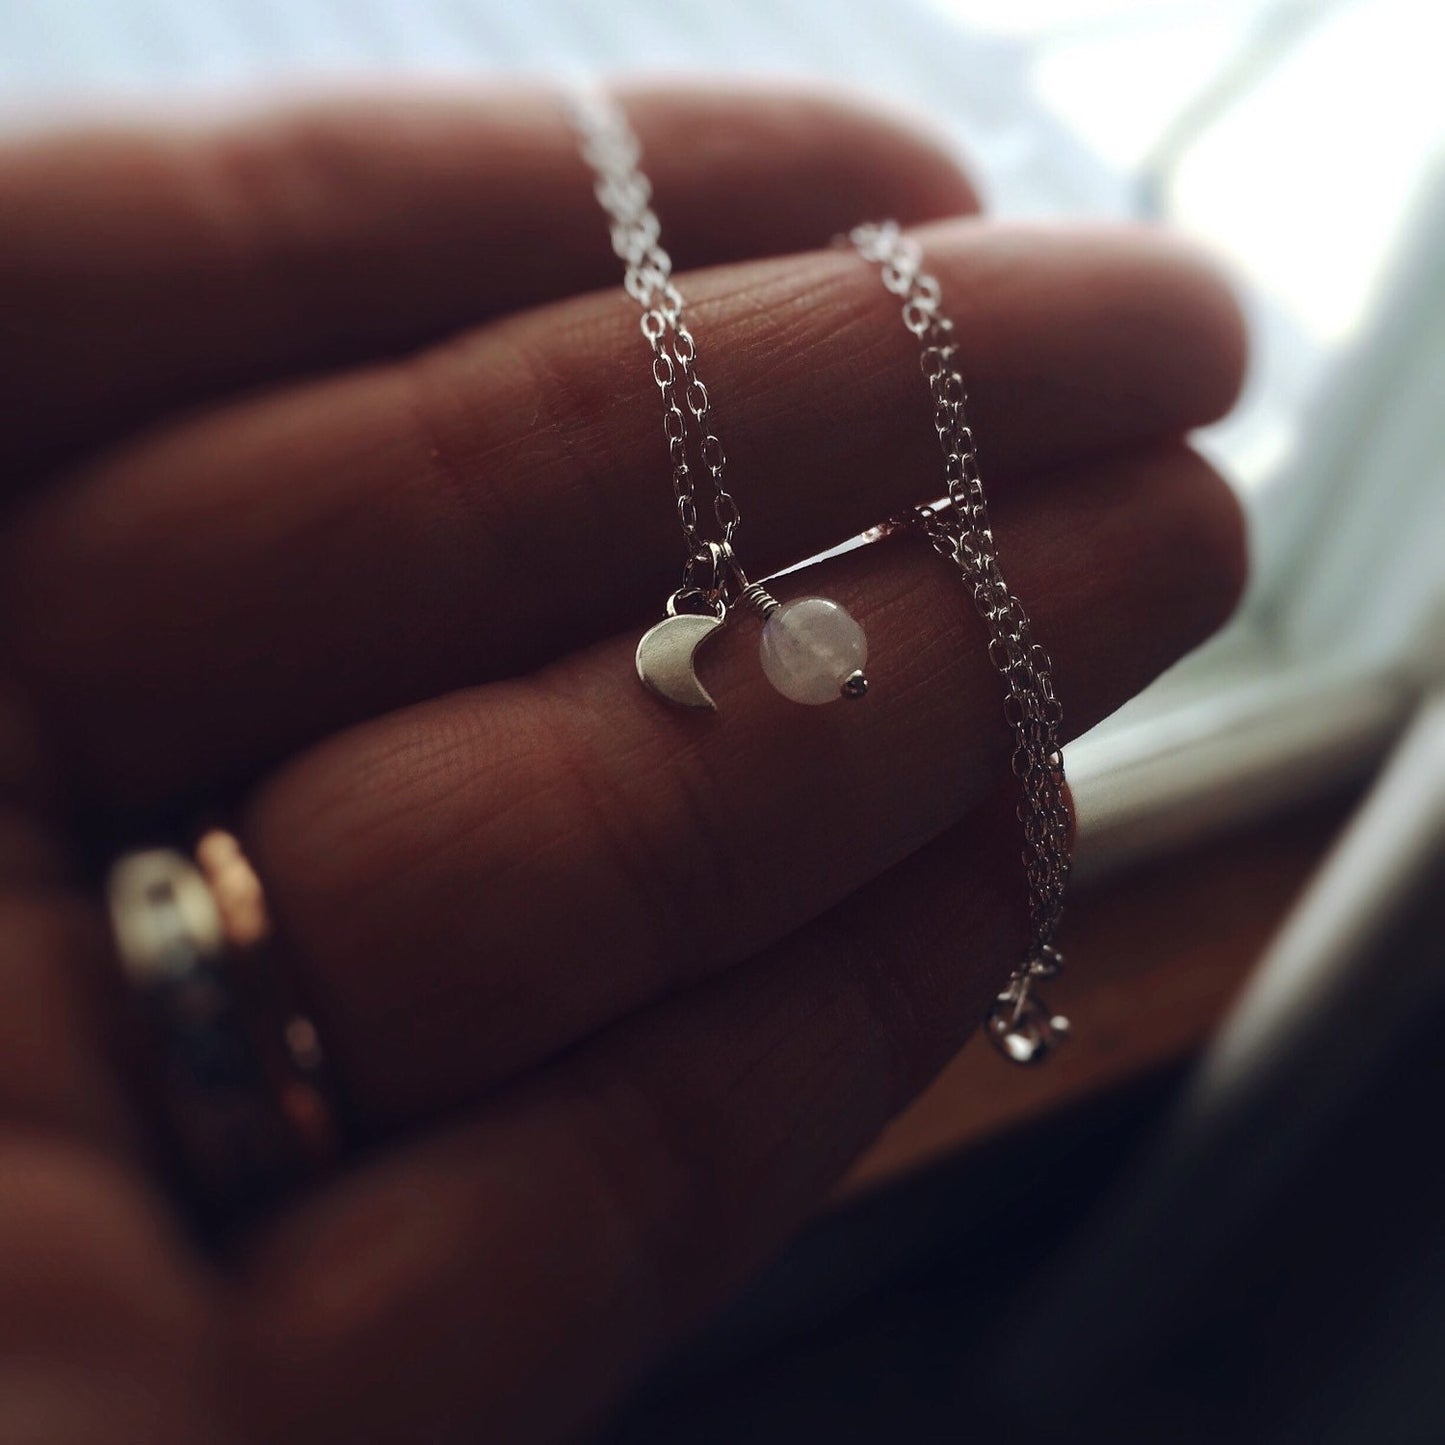 Tiny Moon Necklace, Crescent Moon Necklace, Moonstone Necklace, Dainty Moon Necklace, Gift, Bridal Shower, Baby Shower Necklace, Modern